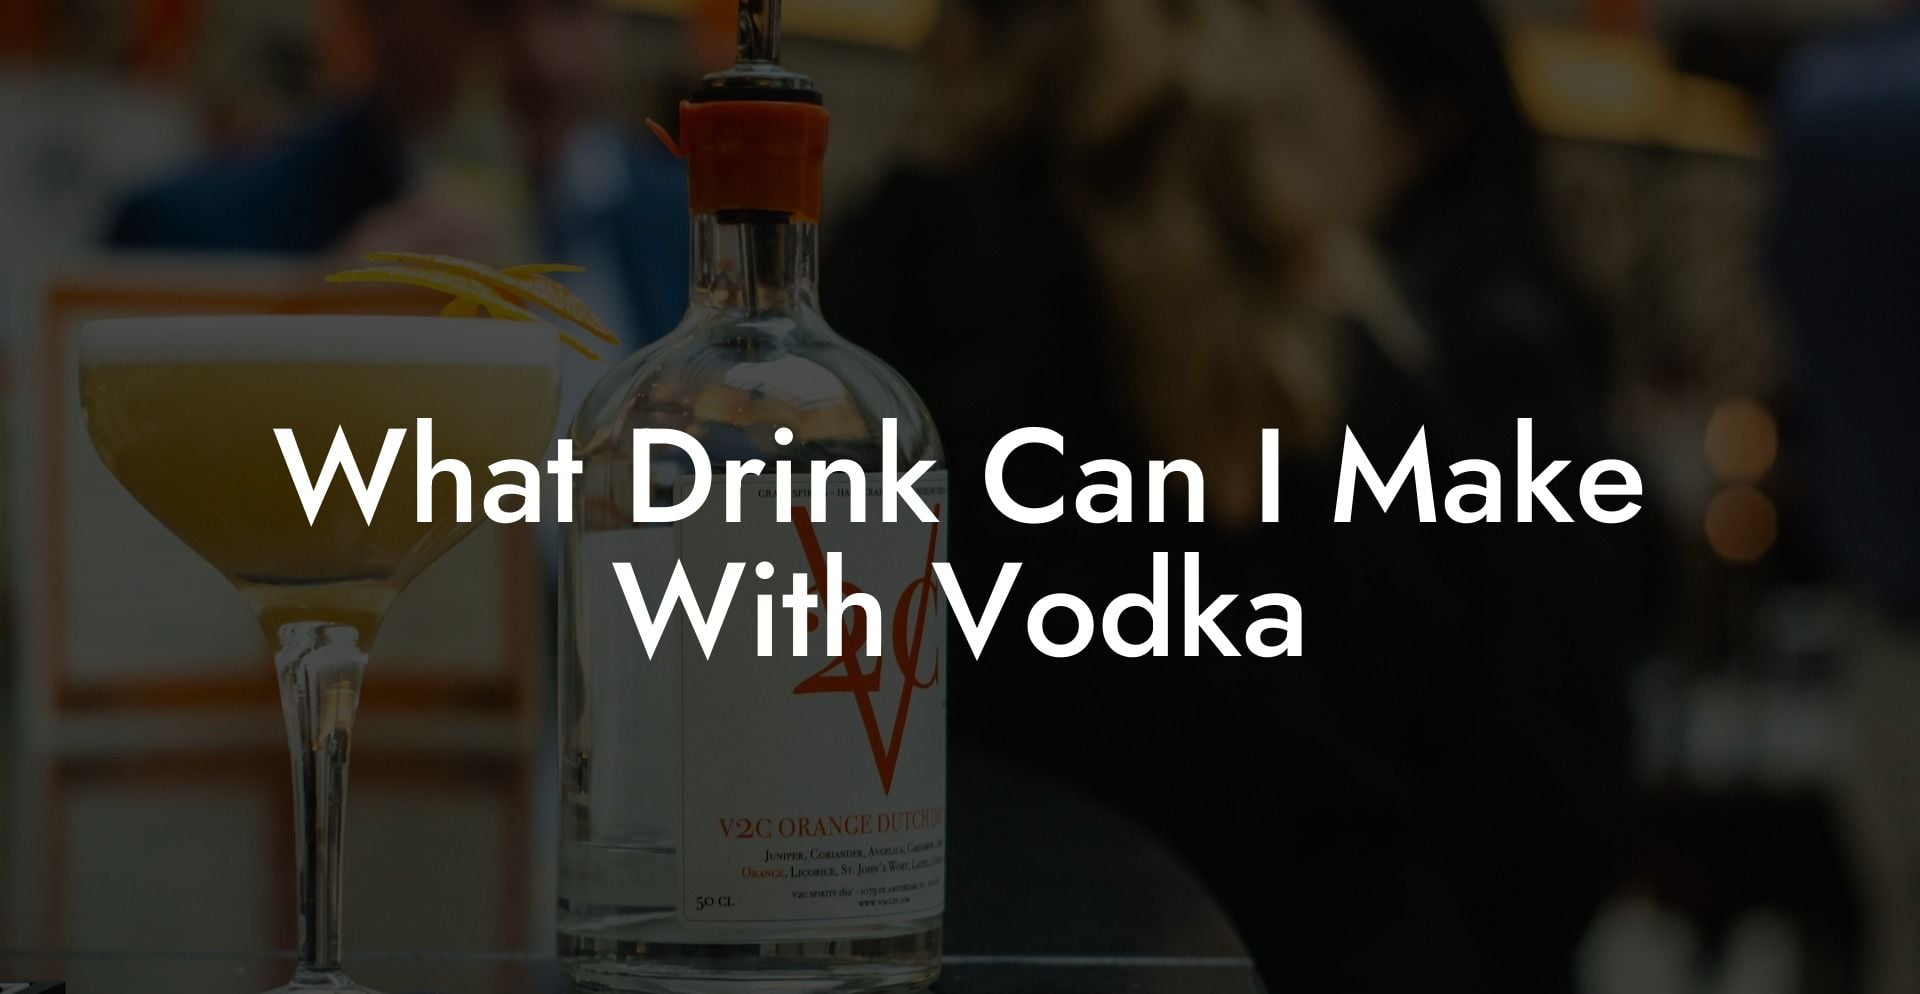 What Drink Can I Make With Vodka